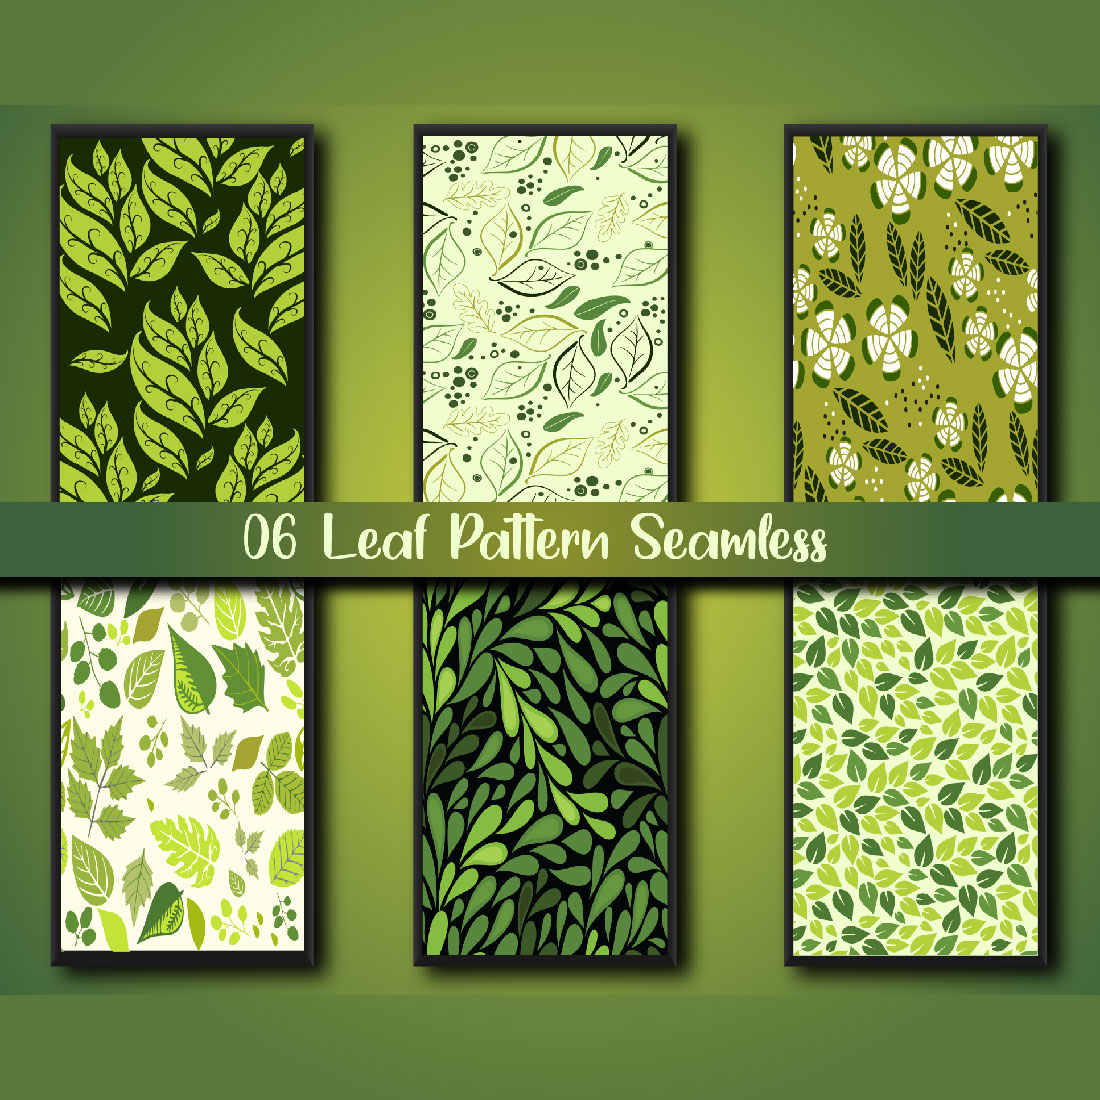 Green Leaves Patterns cover image.